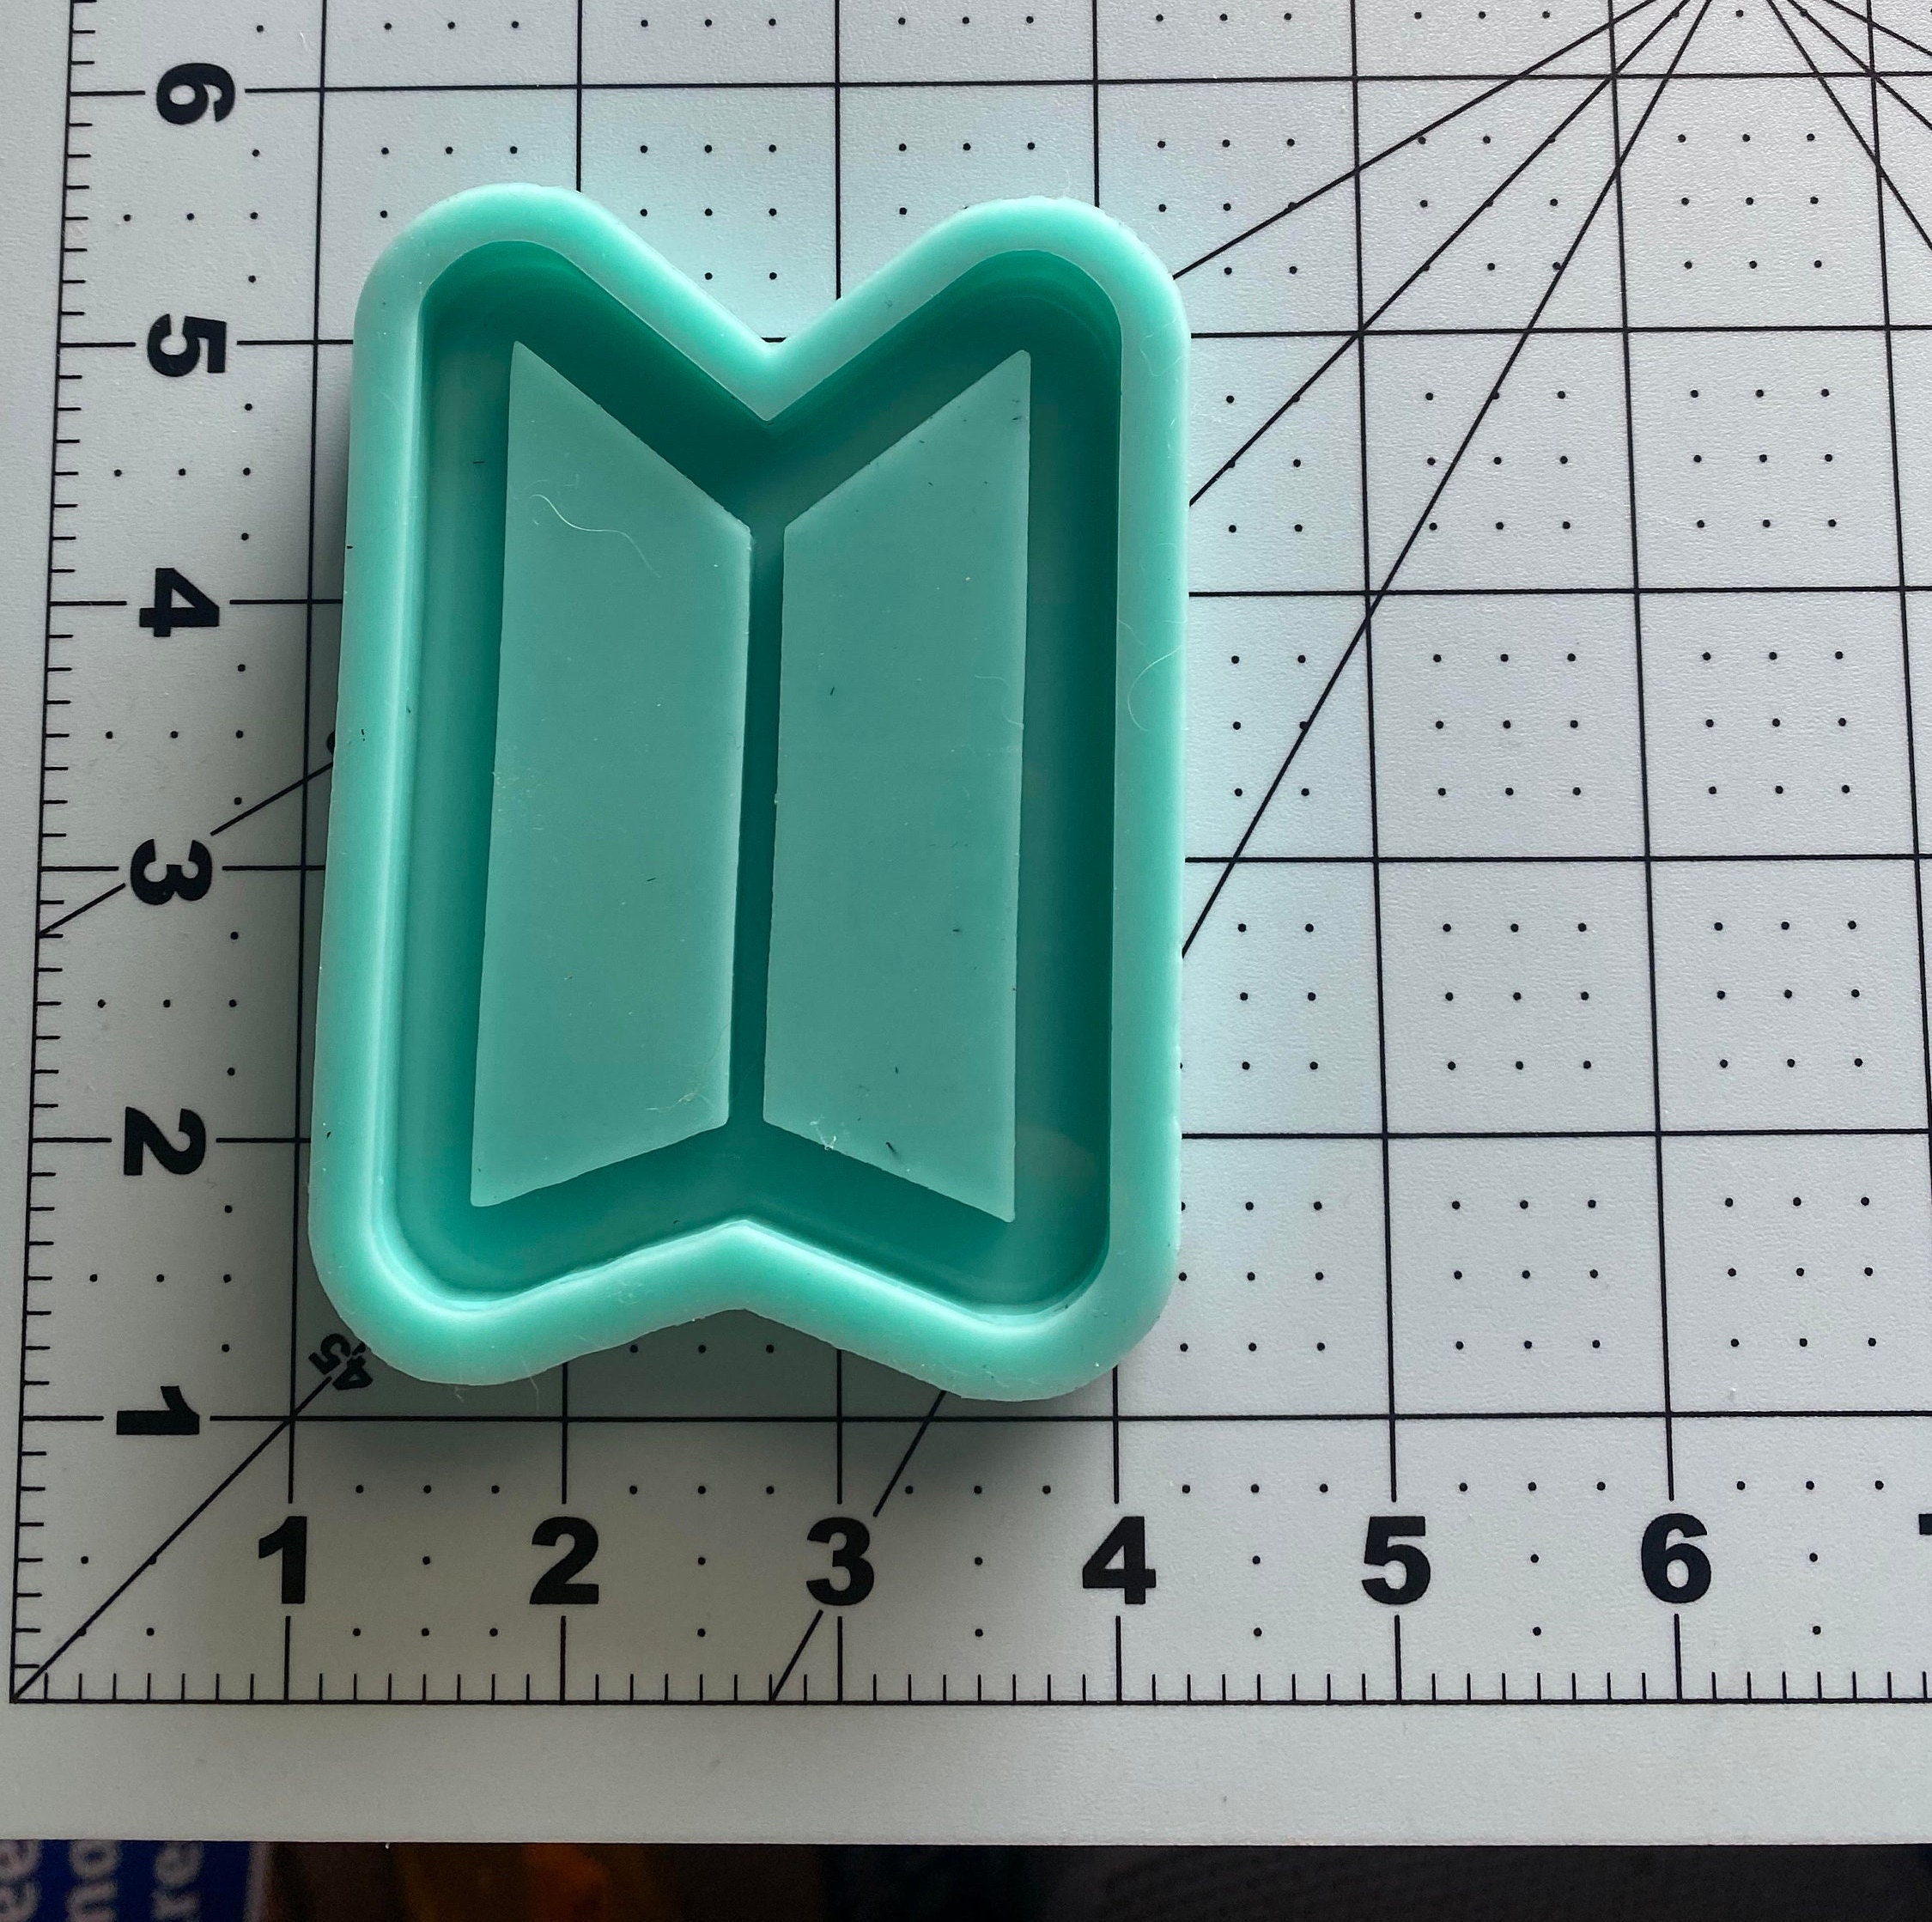 Shaker Bit 18 Mold / KPOP / 12 in 1 / UV Resin Mold / Silicone Mold